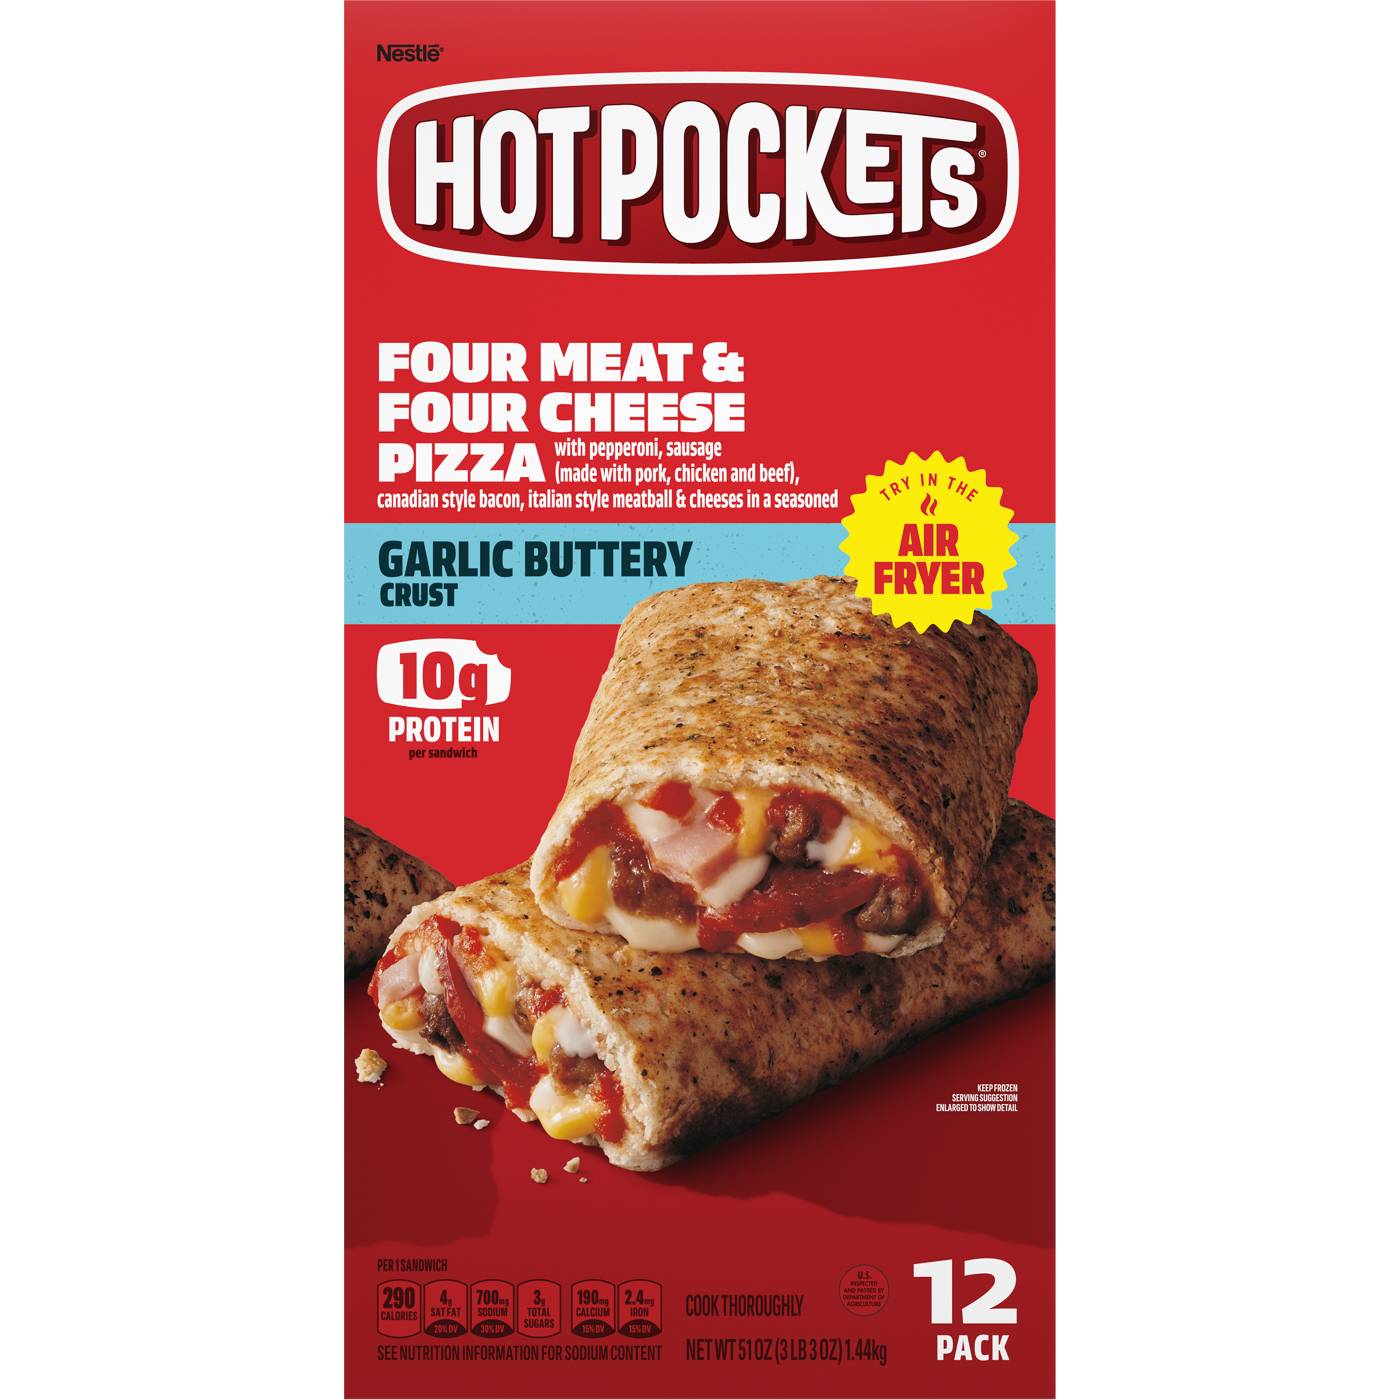 Hot Pockets 4 Meat & 4 Cheese Pizza Frozen Sandwiches - Garlic Buttery Crust; image 1 of 6